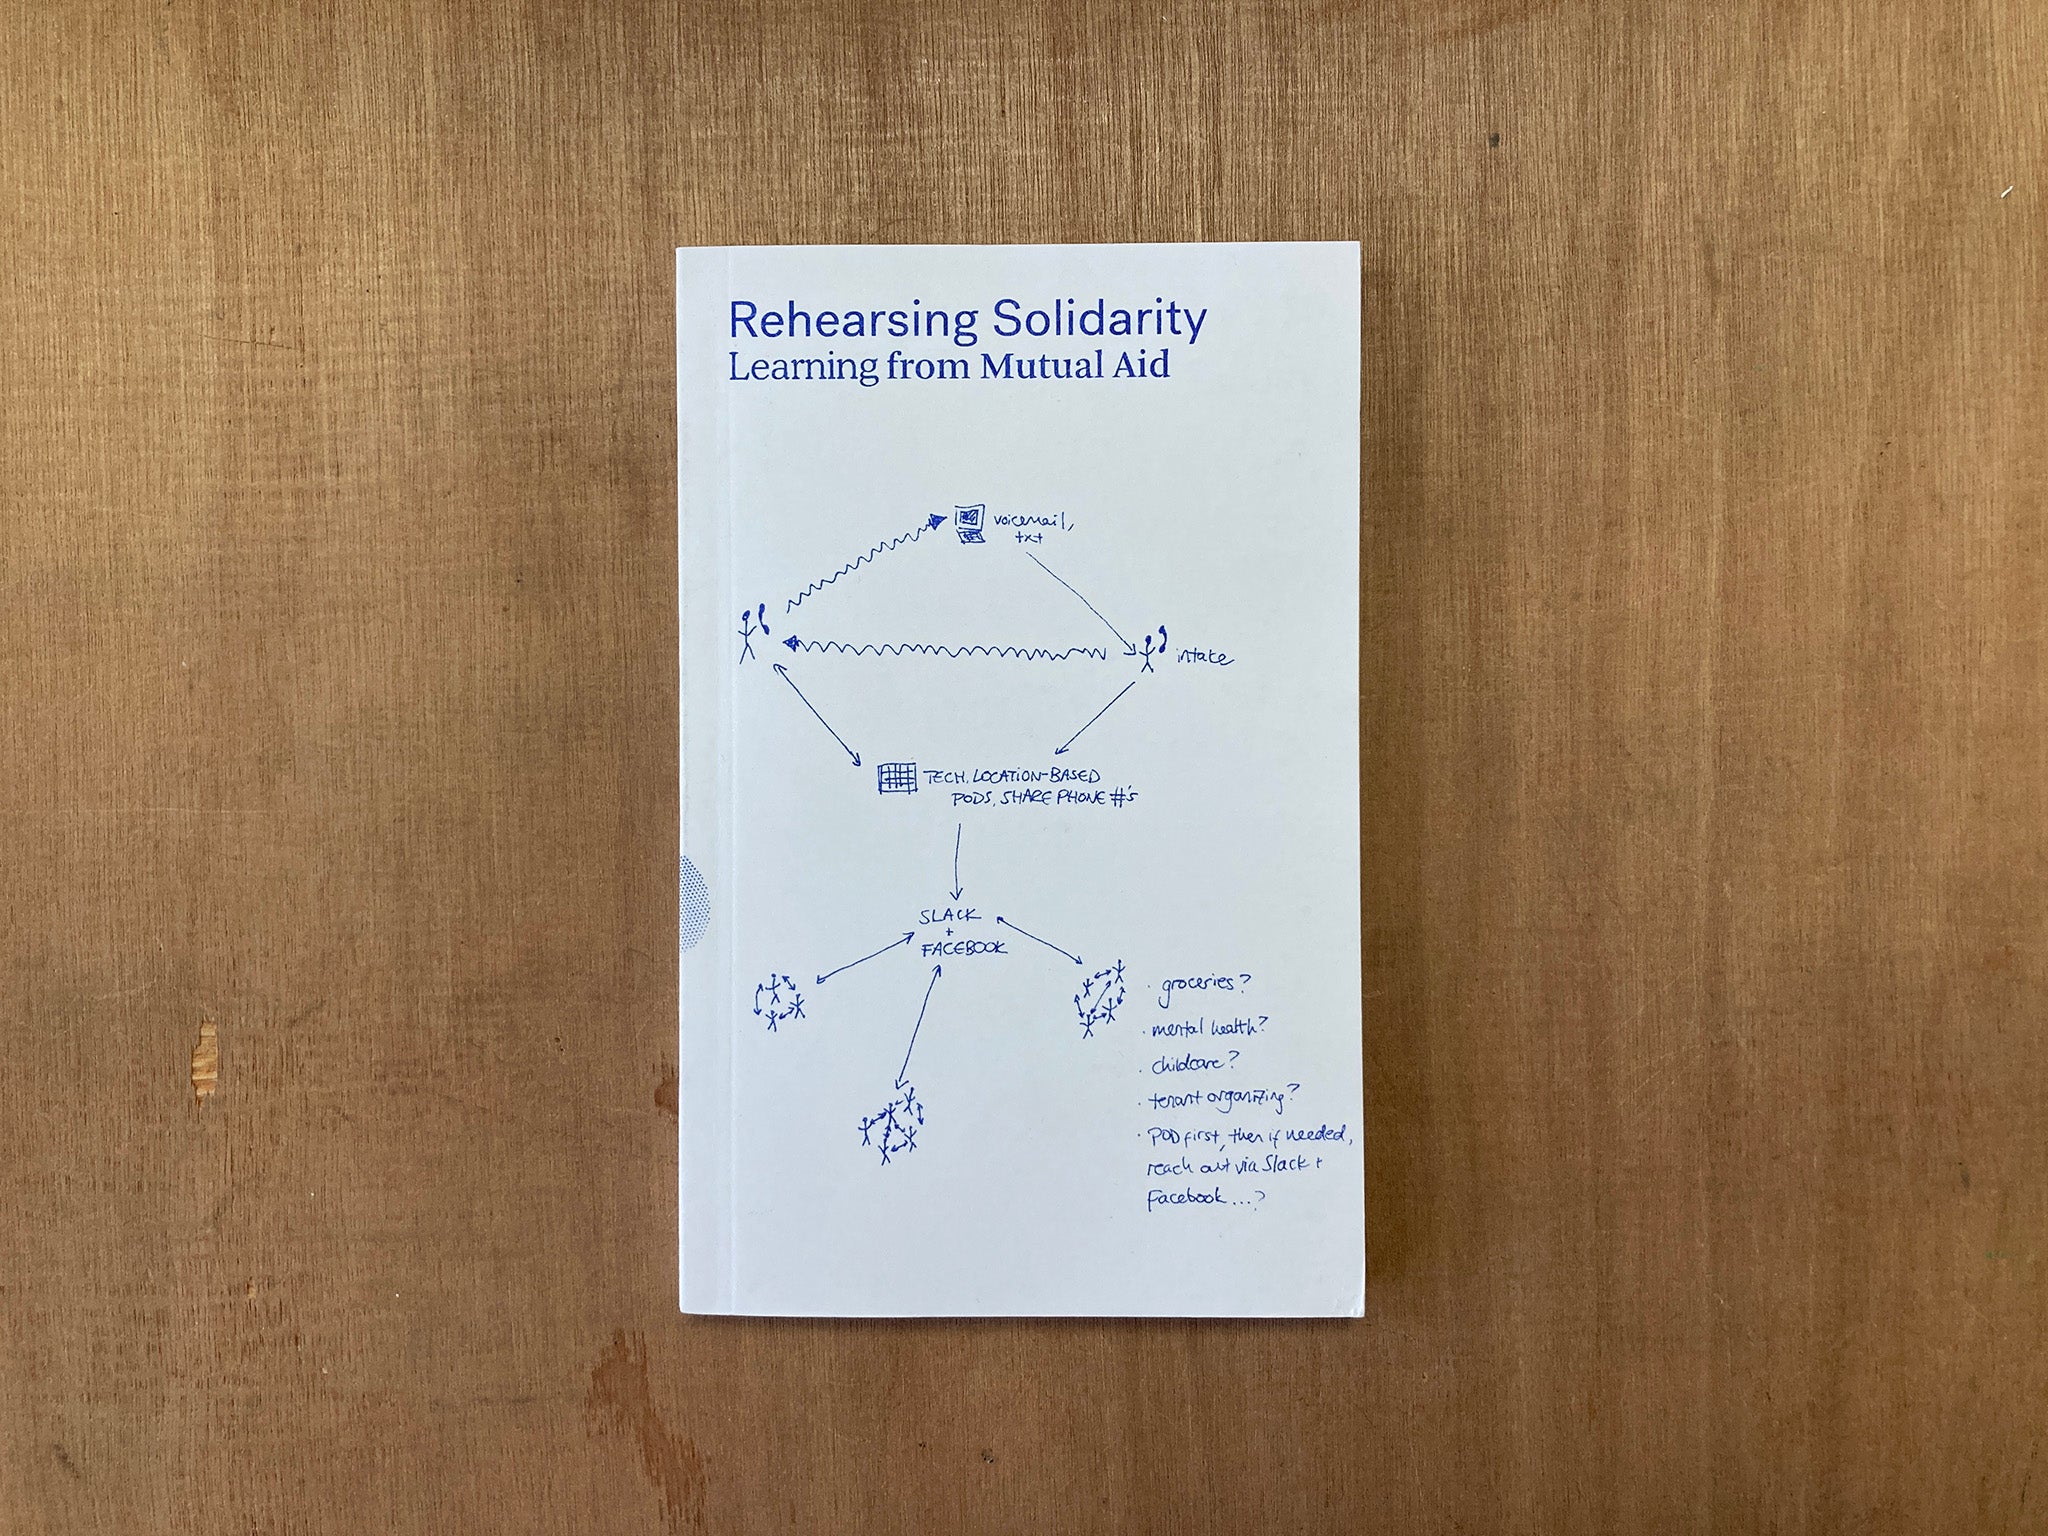 REHEARSING SOLIDARITY: LEARNING FROM MUTUAL AID